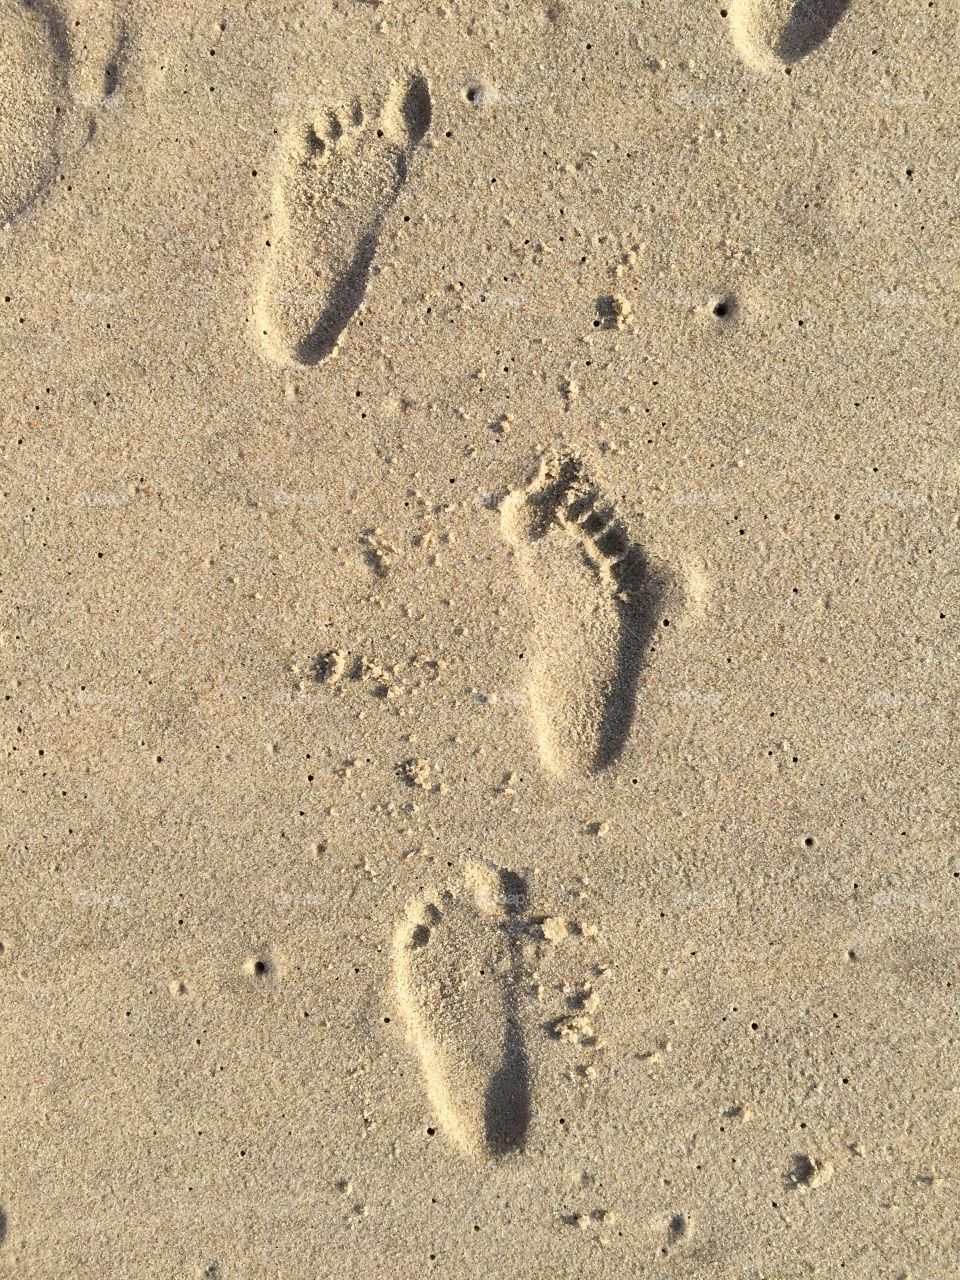 Innocent footprints in the sand. OBX